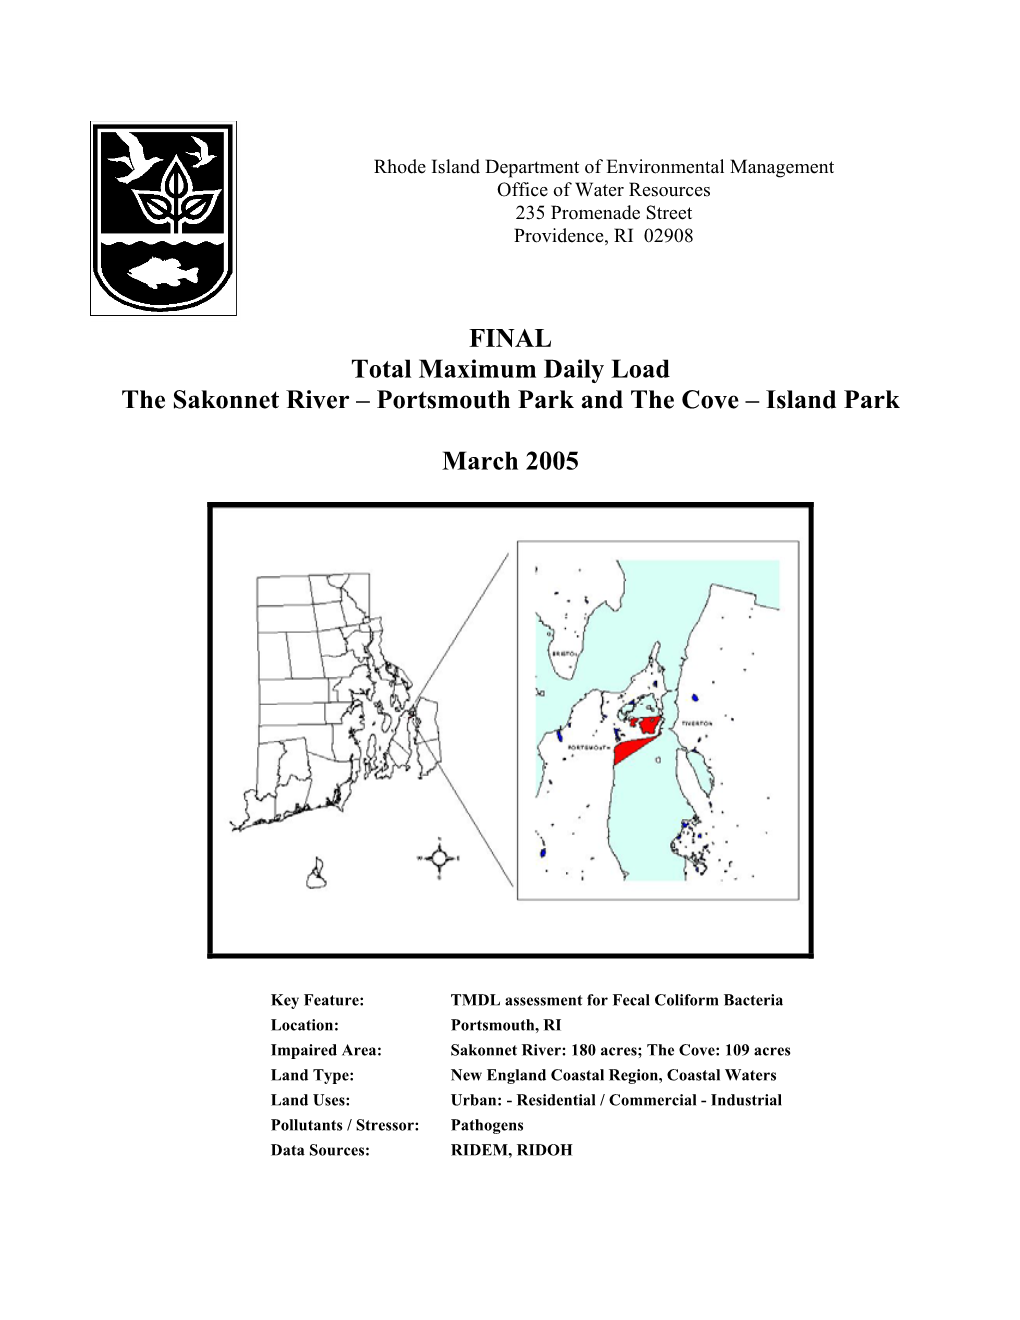 RI DEM/Water Resources- Final Total Maximum Daily Load, the Sakonnet River, Portsmouth Park and the Cove-Island Park